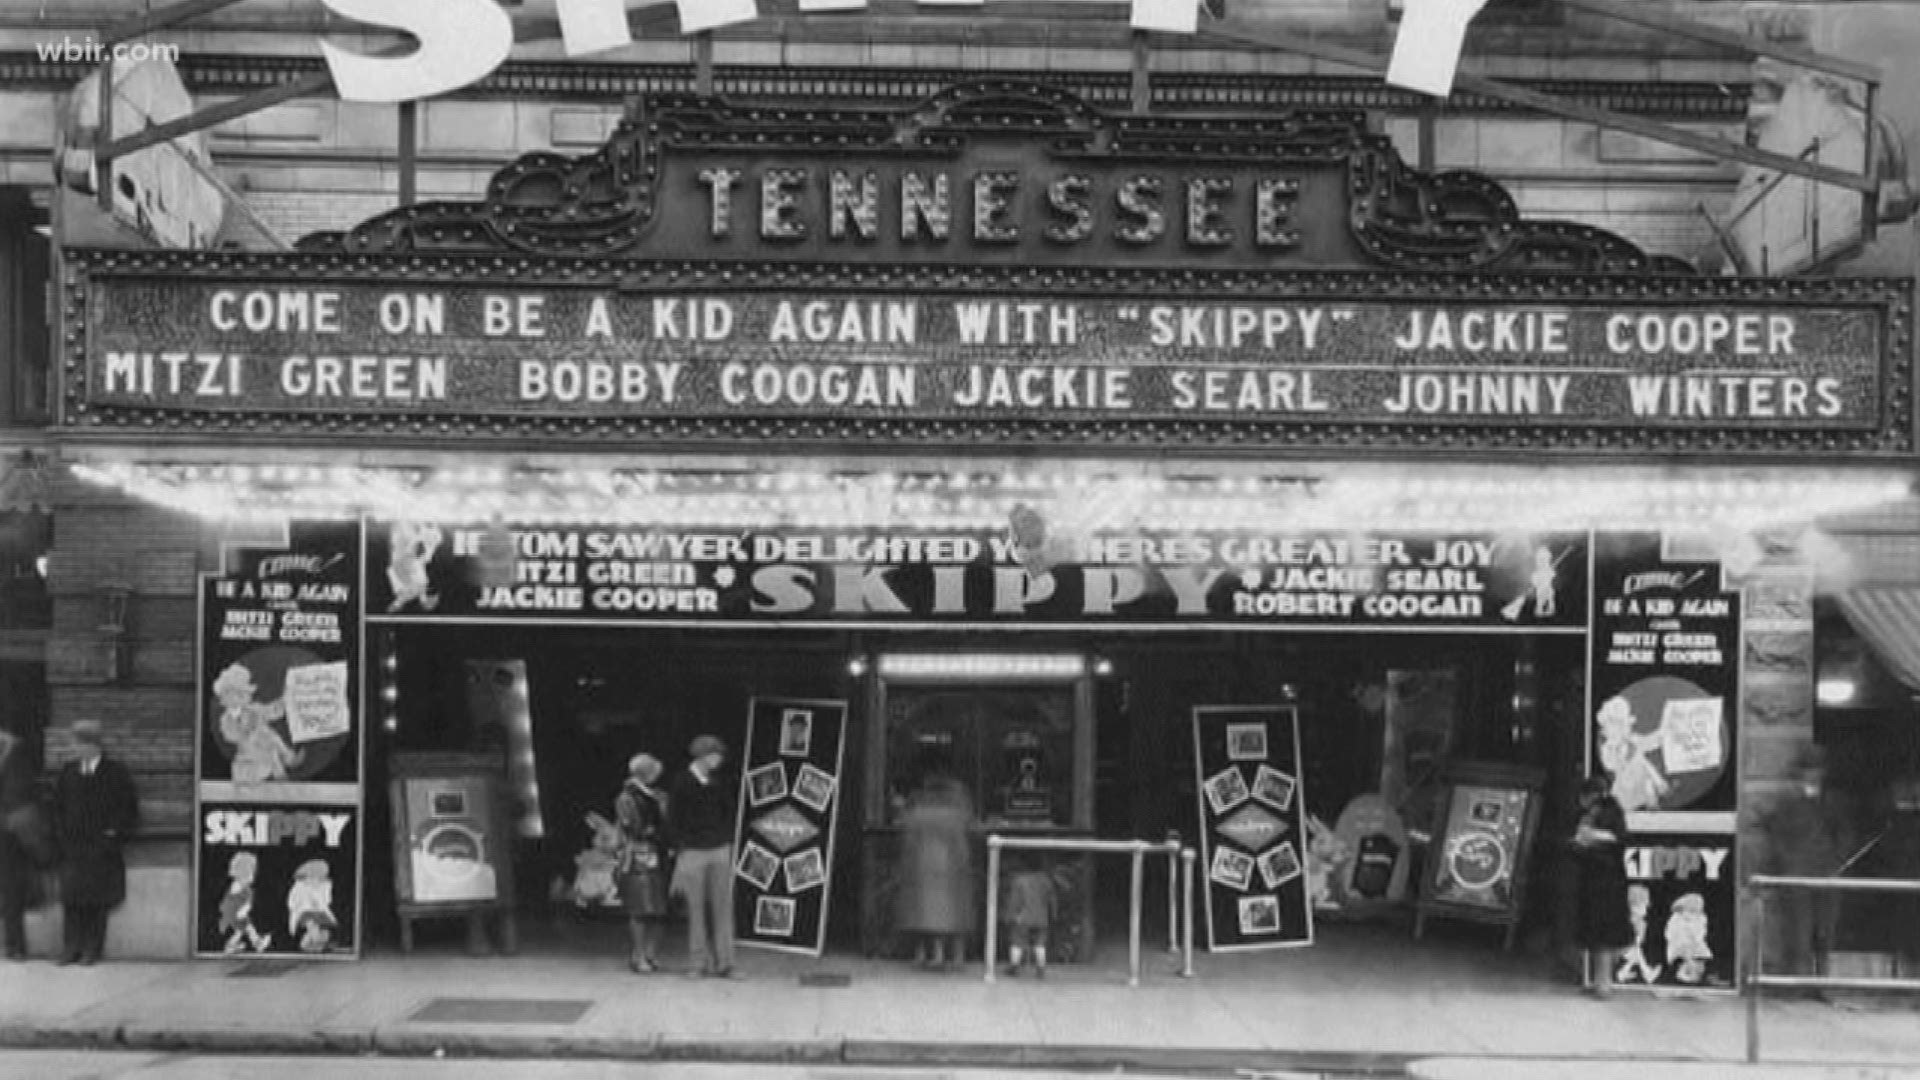 The Tennessee Theatre opened on October 1, 1928 in downtown Knoxville. The historic movie palace has been through many ups and downs on its way to being the state-of-the art performance venue it is today.